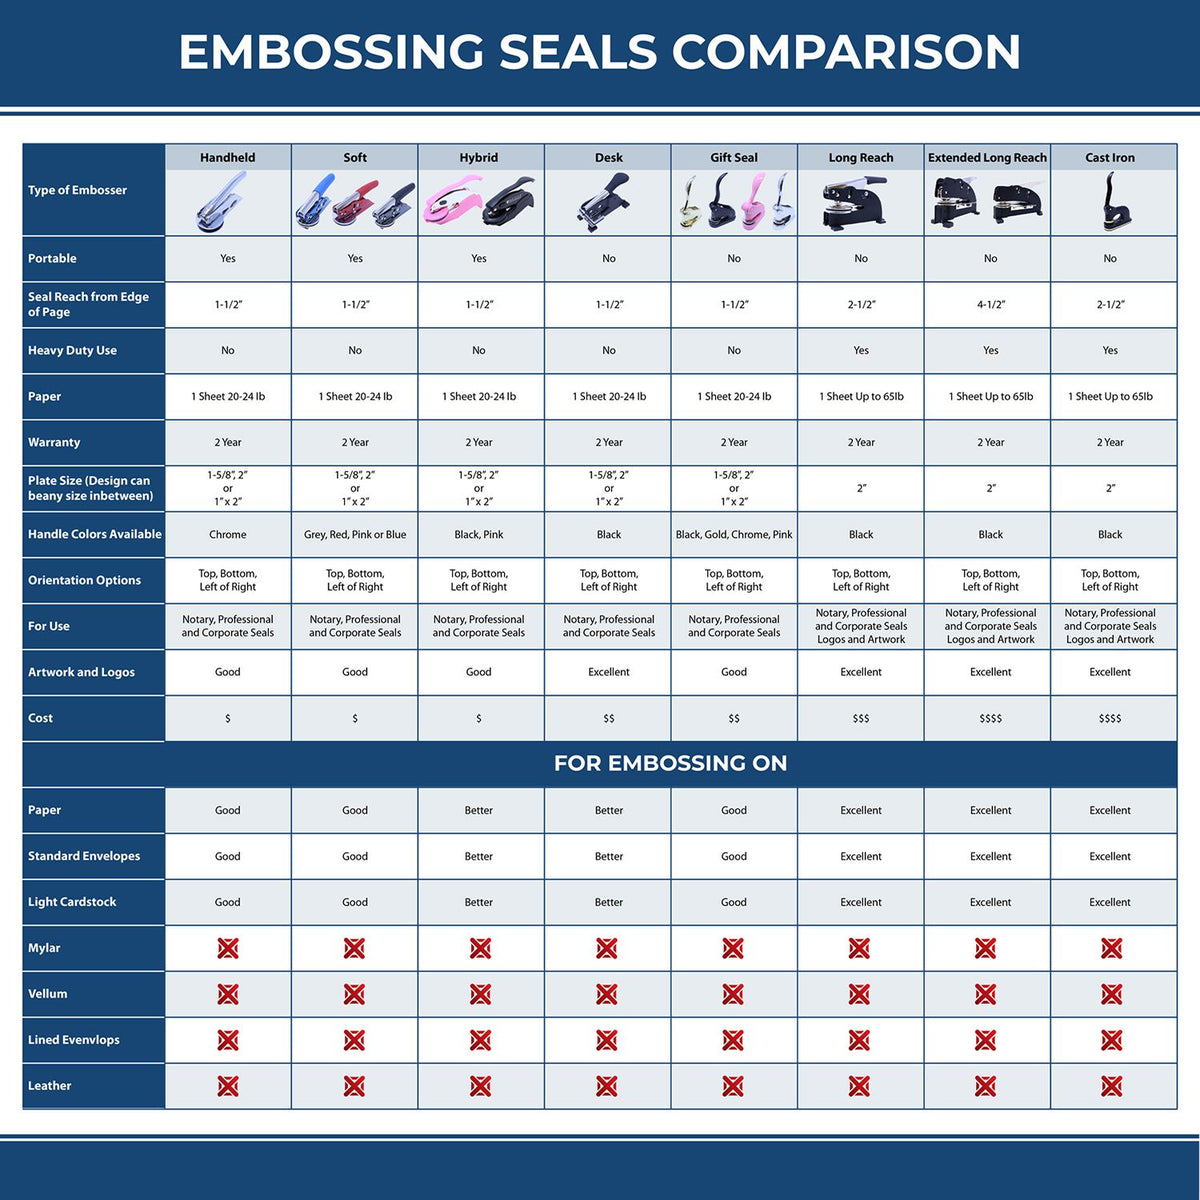 A comparison chart for the different types of mount models available for the Long Reach Oklahoma PE Seal.